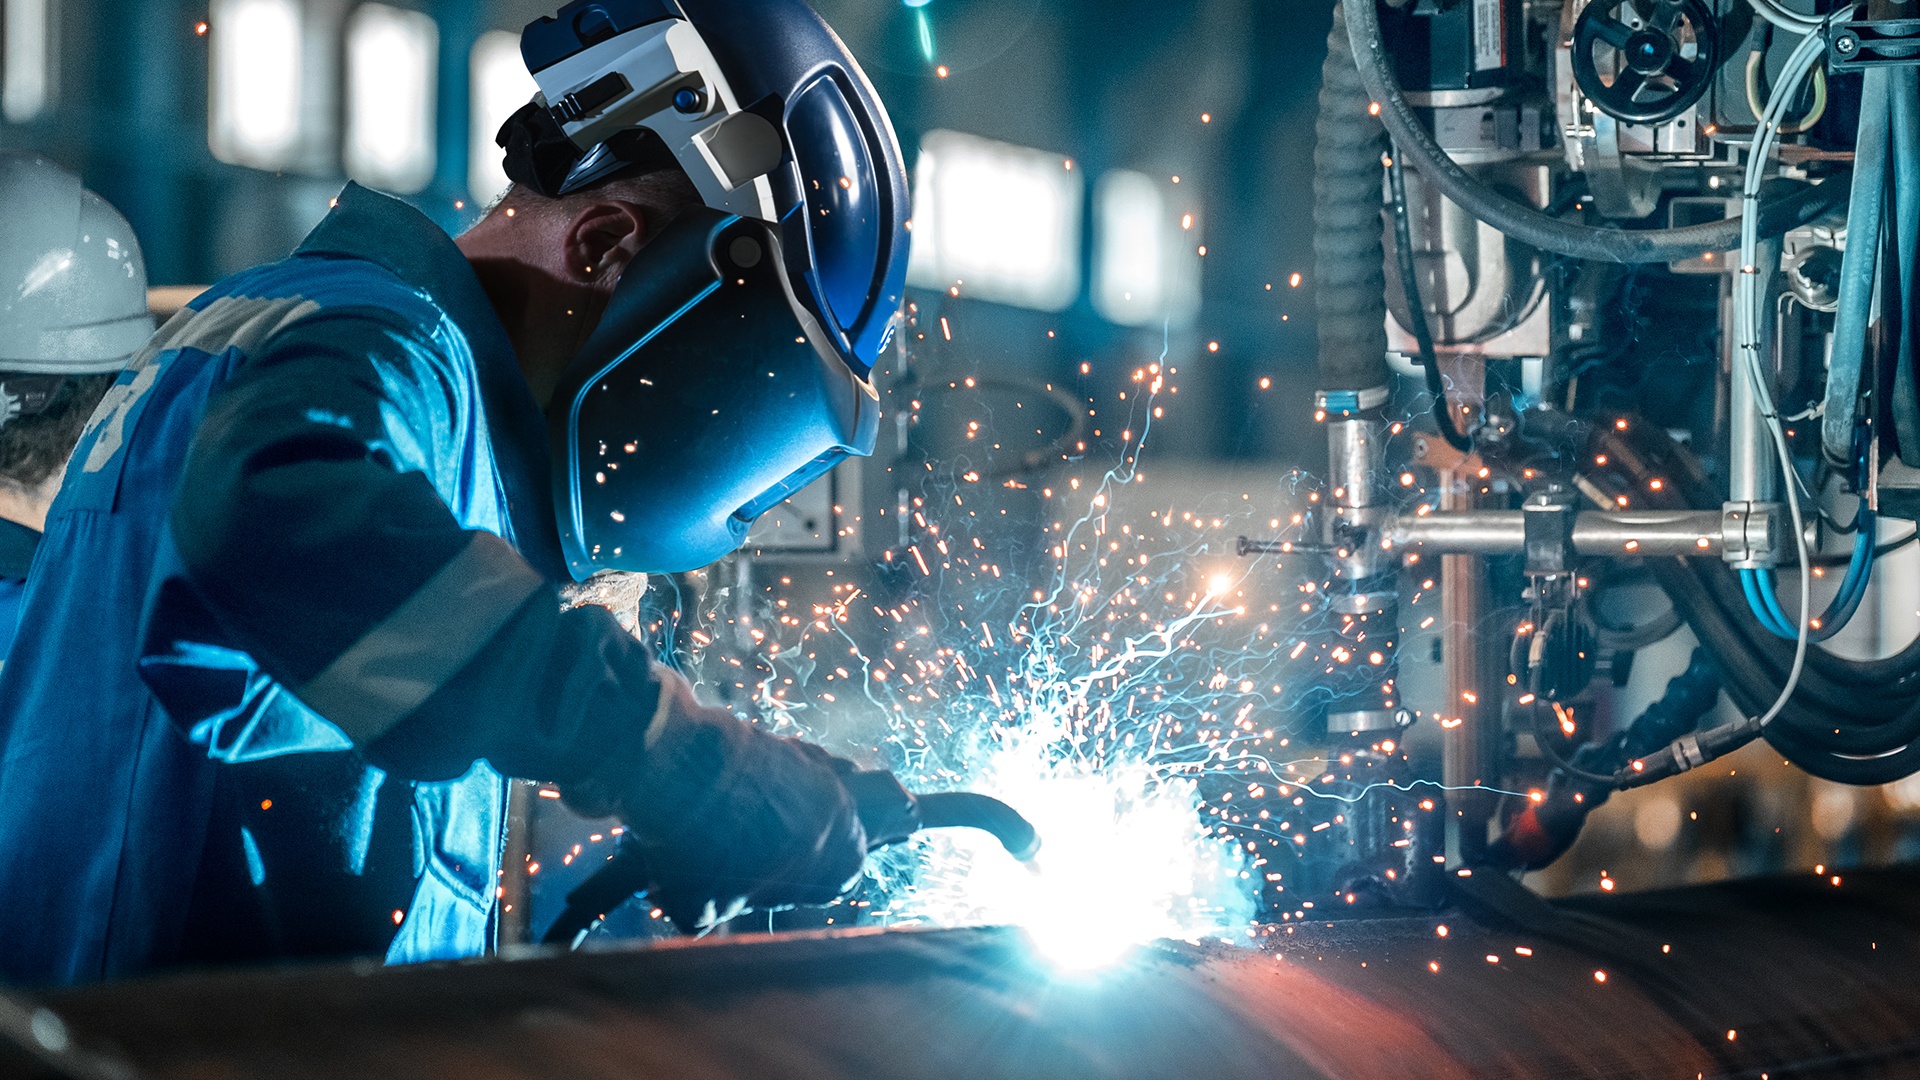 Next Generation, American-Made Welding Protection Your Customers Can Count On